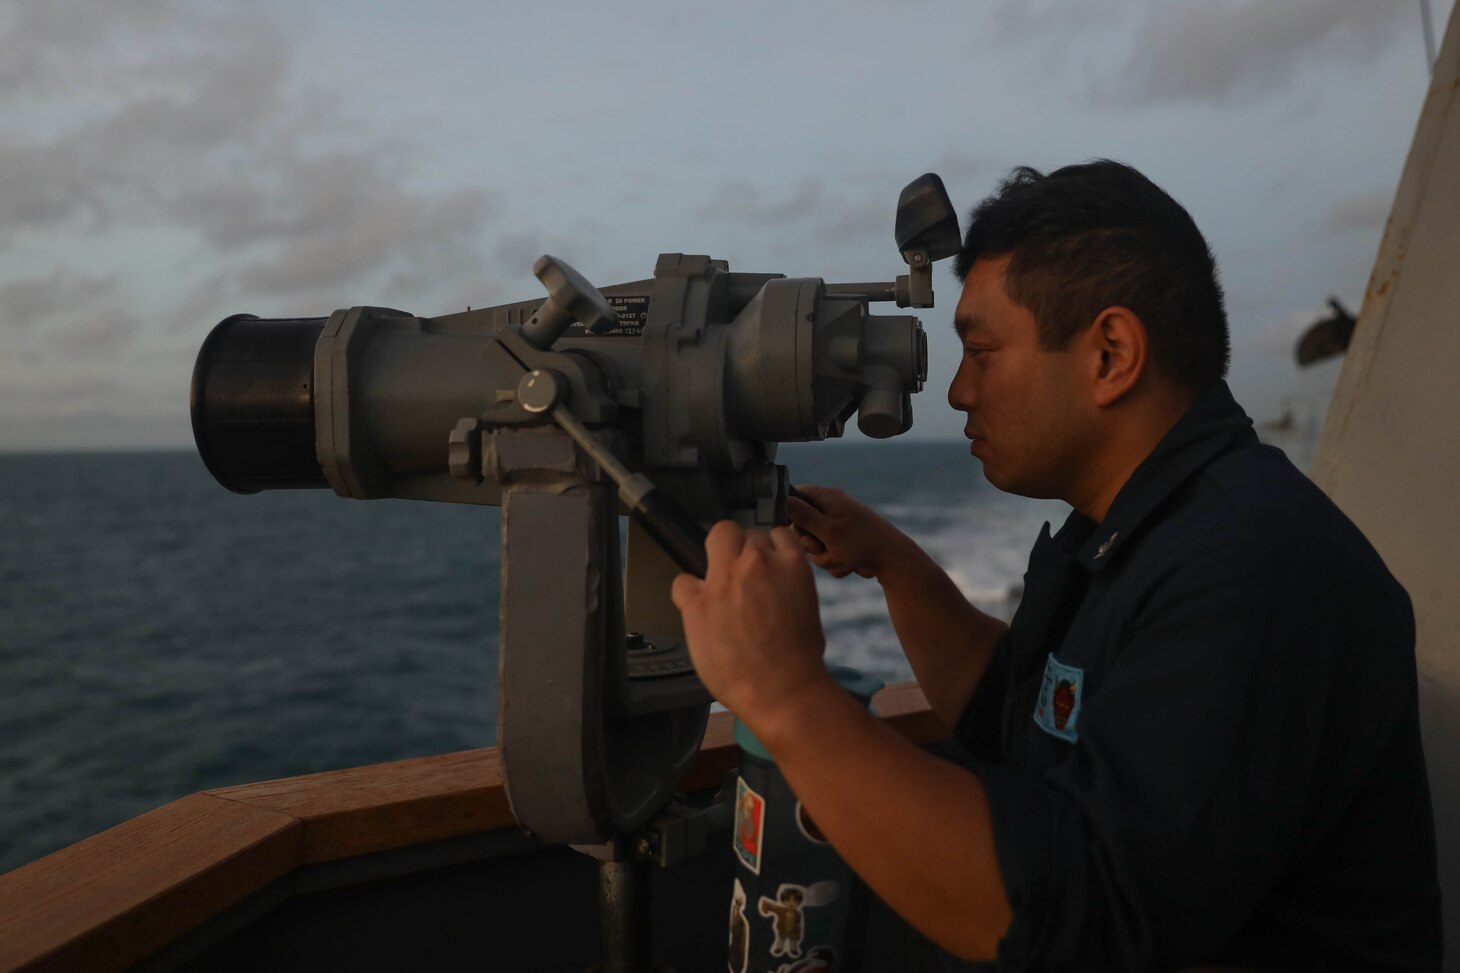 231102-N-CV021-1054 TAIWAN STRAIT (Nov. 2, 2023) Sonar Technician Surface 3rd Class John Valor, from Chicago, stands watch on the bridge aboard the Arleigh Burke-class guided-missile destroyer USS Rafael Peralta (DDG 115) in the Taiwan Strait, Nov. 2. Rafael Peralta is forward-deployed and assigned to Commander, Task Force 71/Destroyer Squadron (DESRON) 15, the Navy’s largest DESRON and the U.S. 7th Fleet’s principal surface force. (U.S. Navy photo by Mass Communication Specialist 3rd Class Alexandria Esteban)